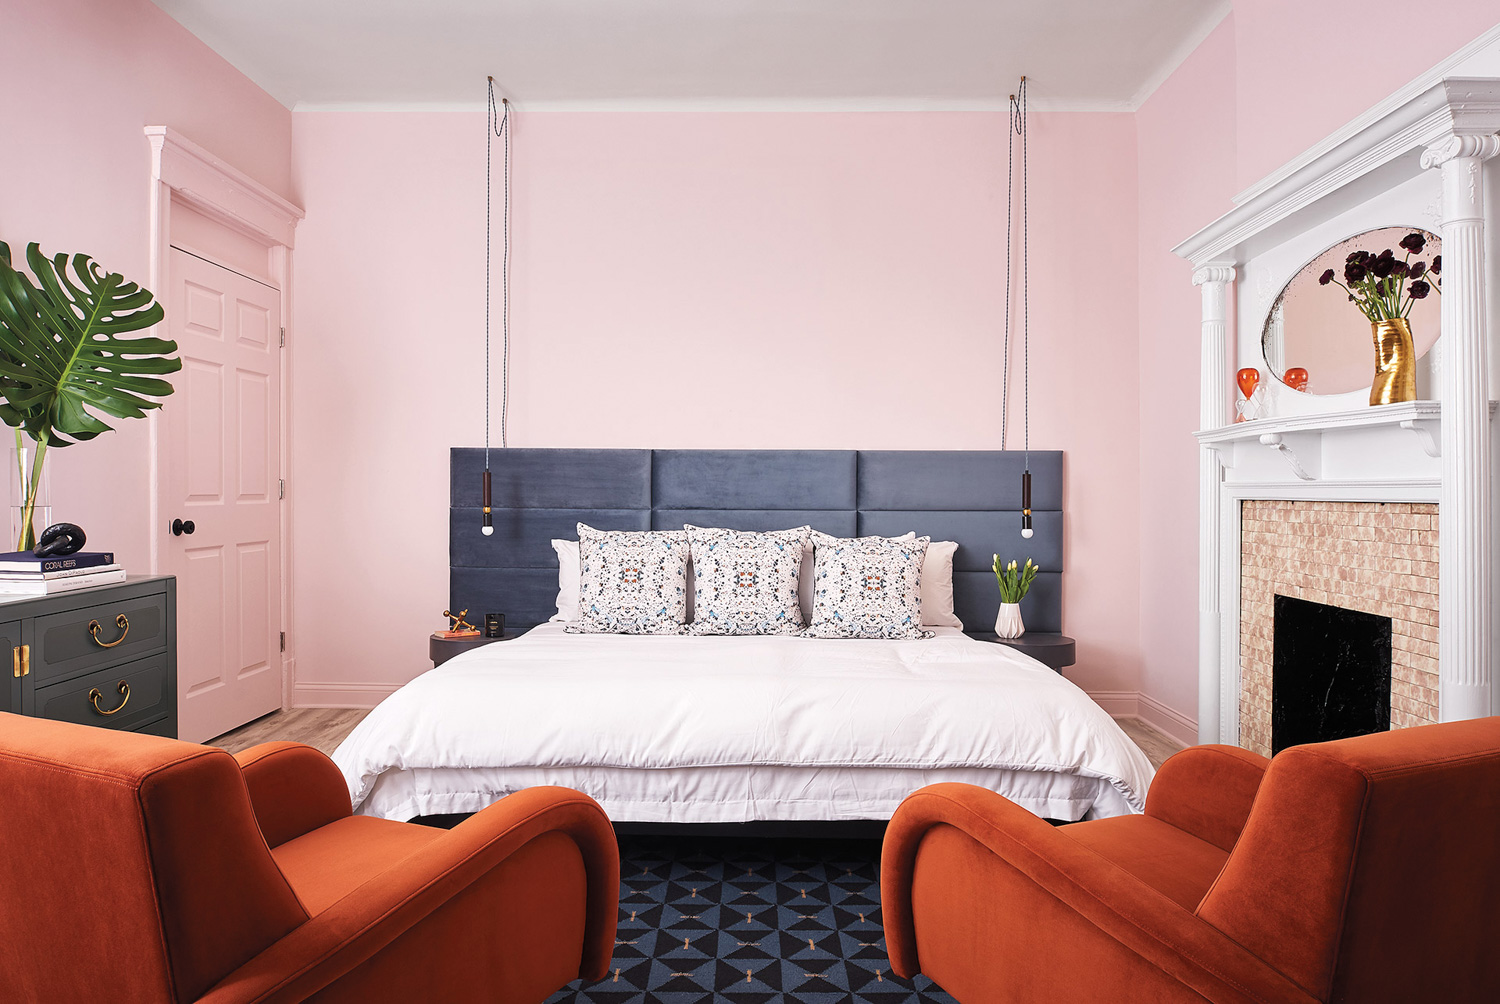 Hotel bedroom with pink walls, vibrant furnishings and a fireplace